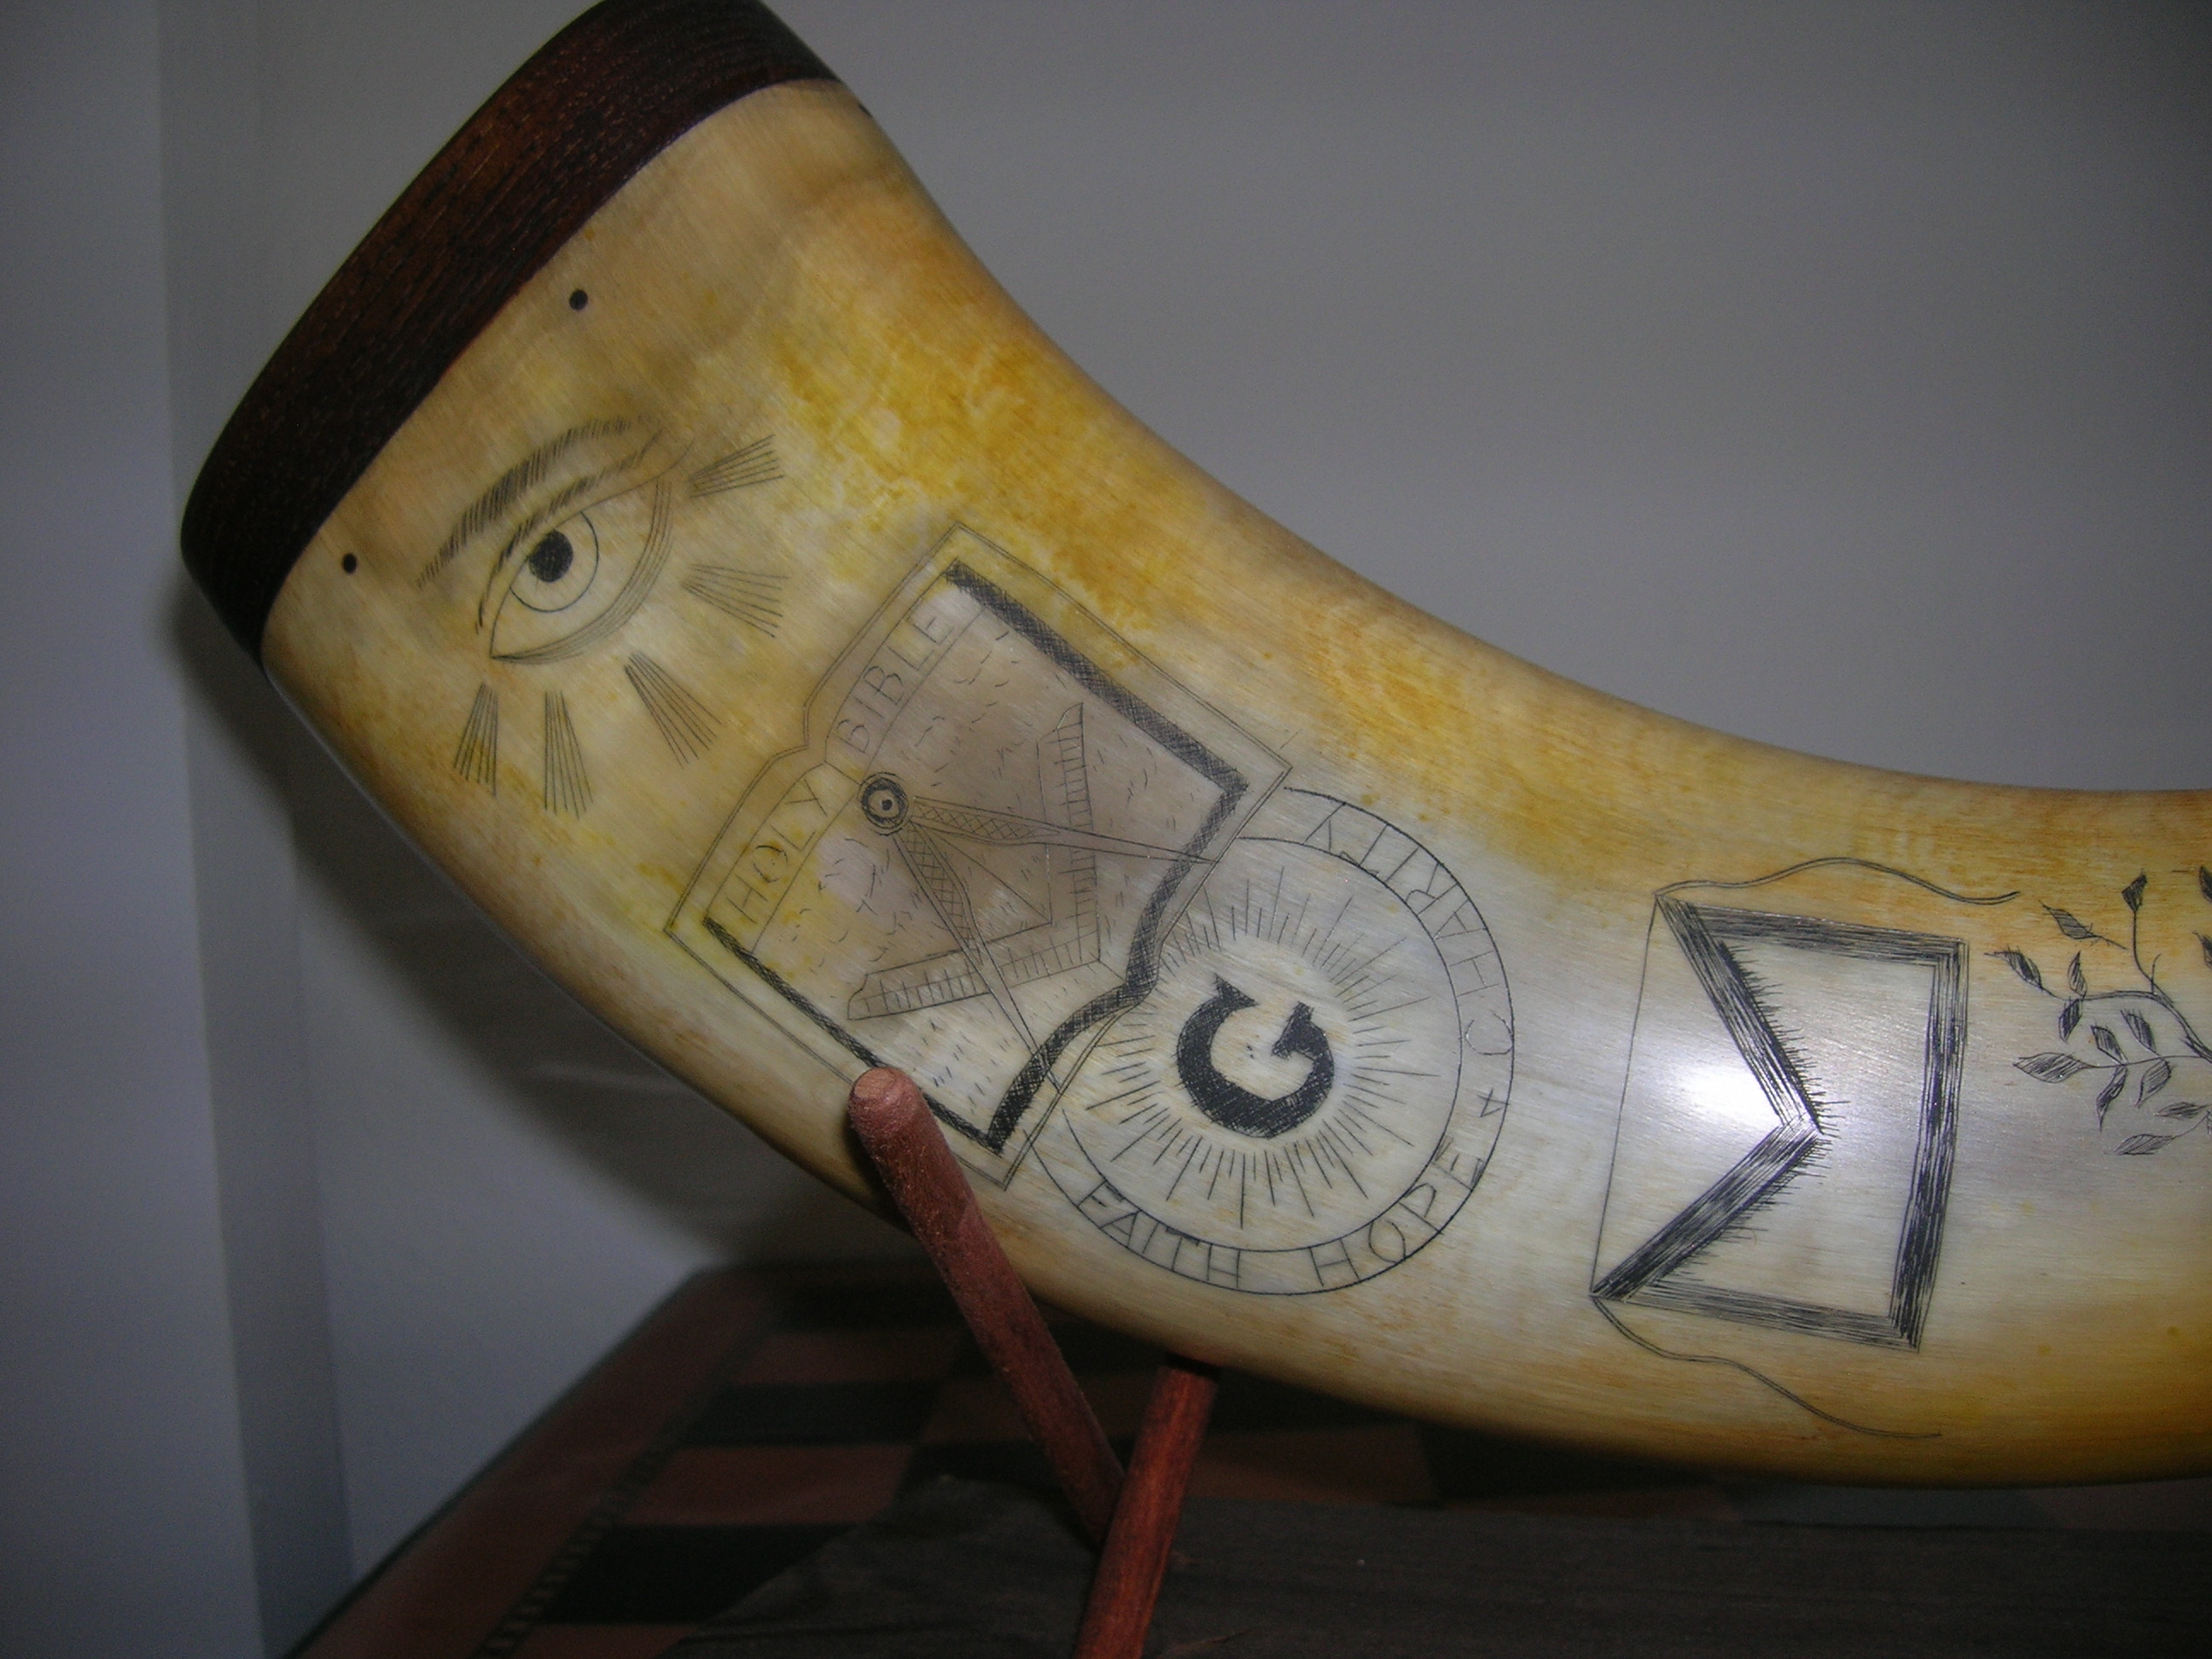 Powder horn from Colonial days